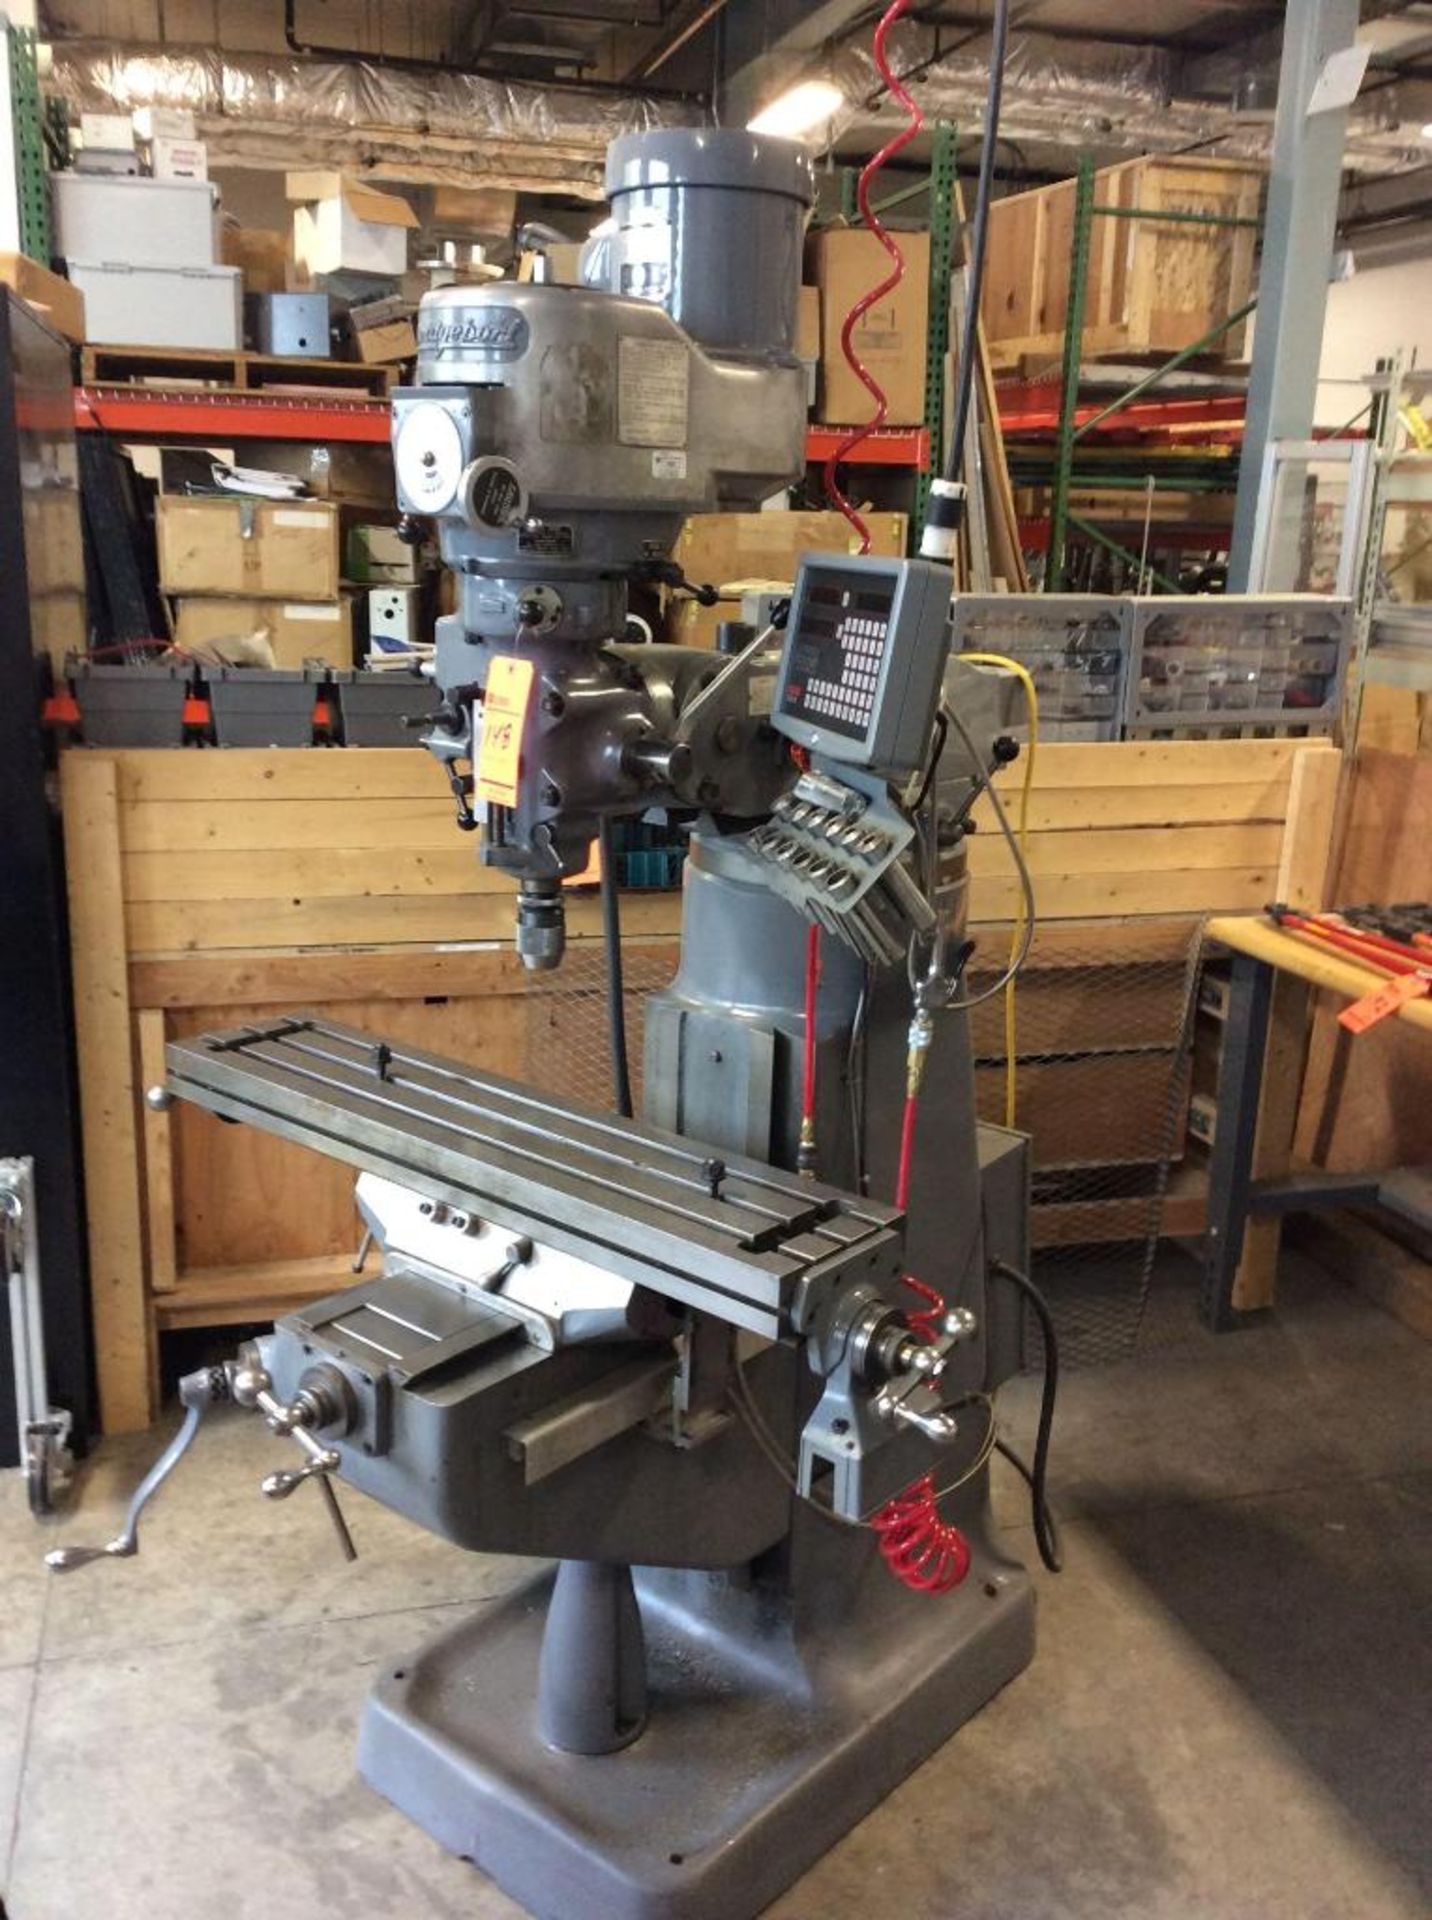 Bridgeport vertical milling machine, sn 12BR167296, 1 1/2 hp, 9" x 42" T-slot table with power feed, - Image 2 of 5